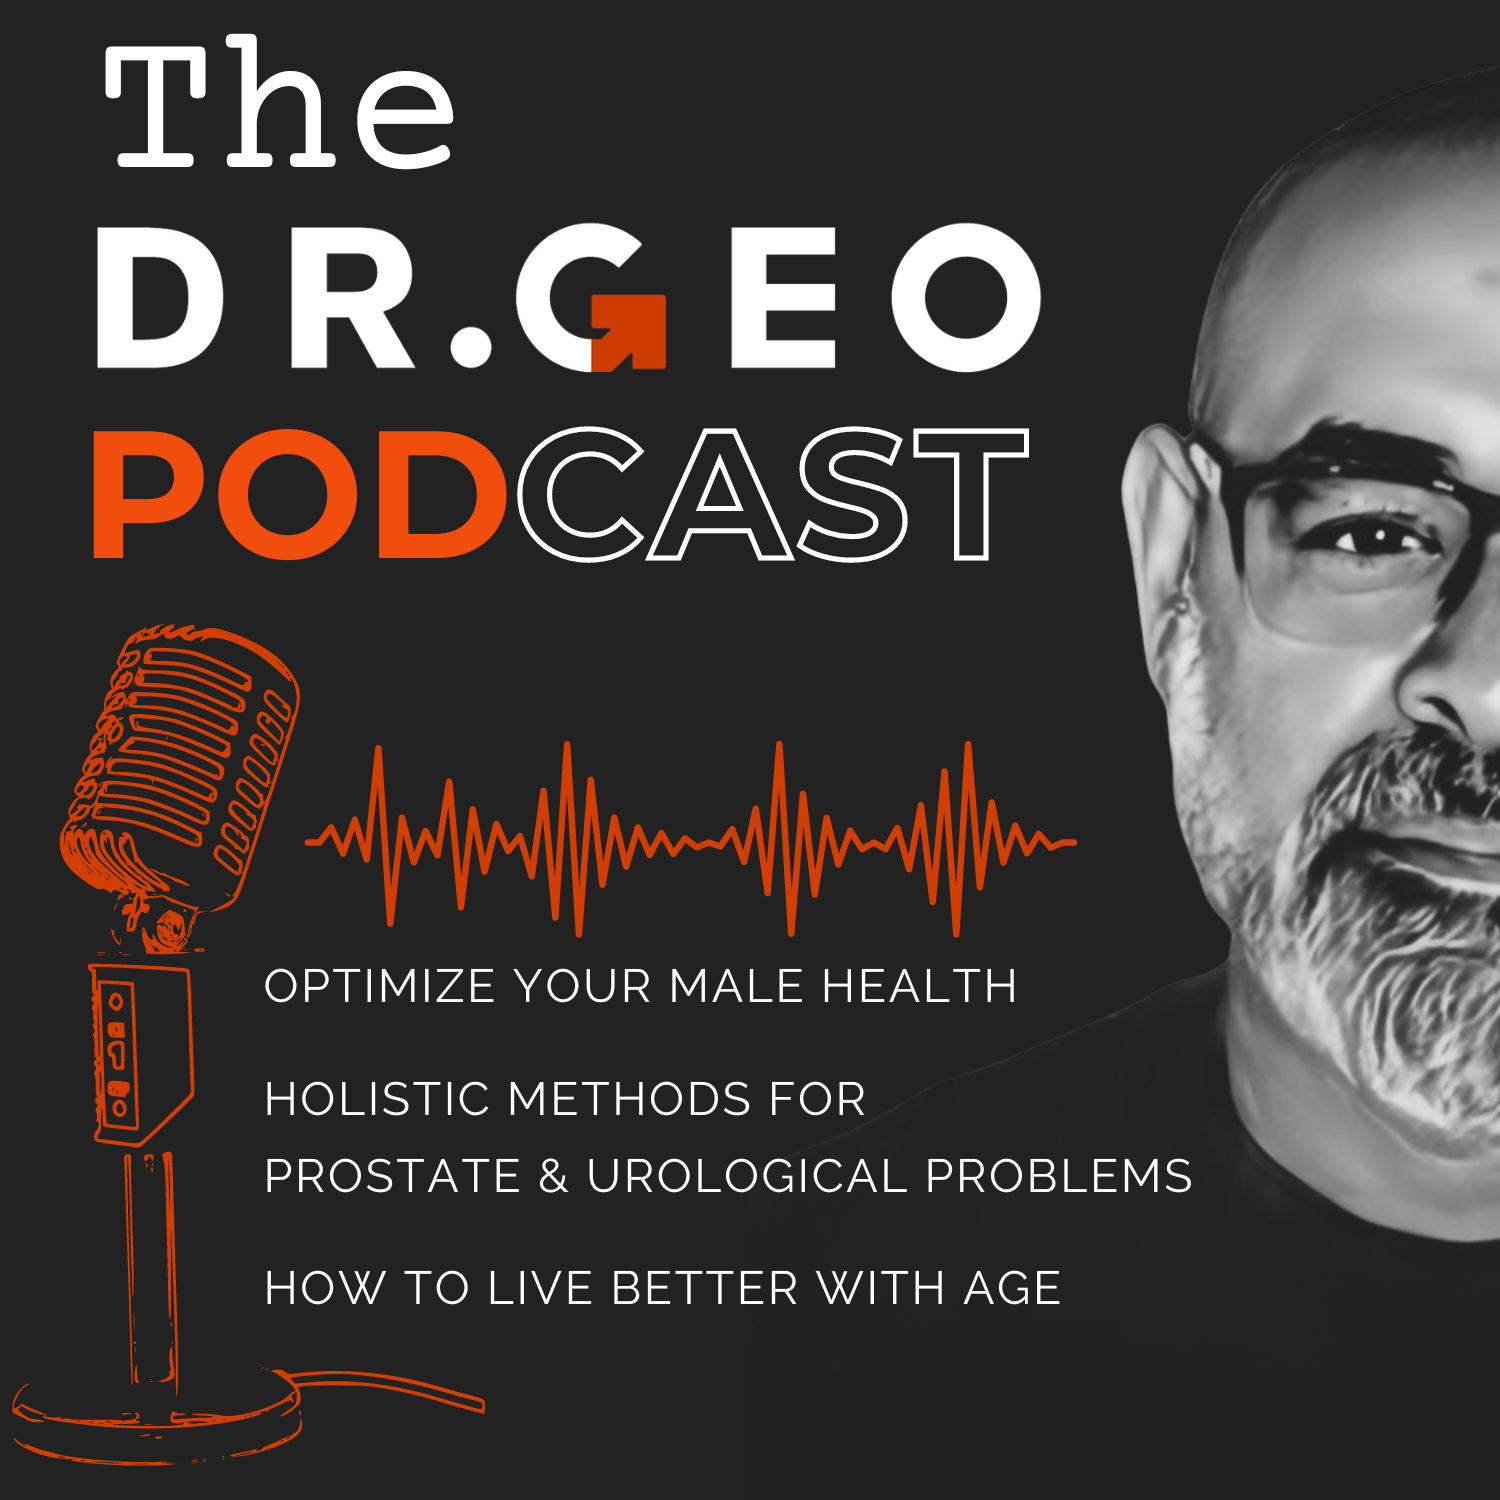 Artwork for podcast The Dr. Geo Podcast